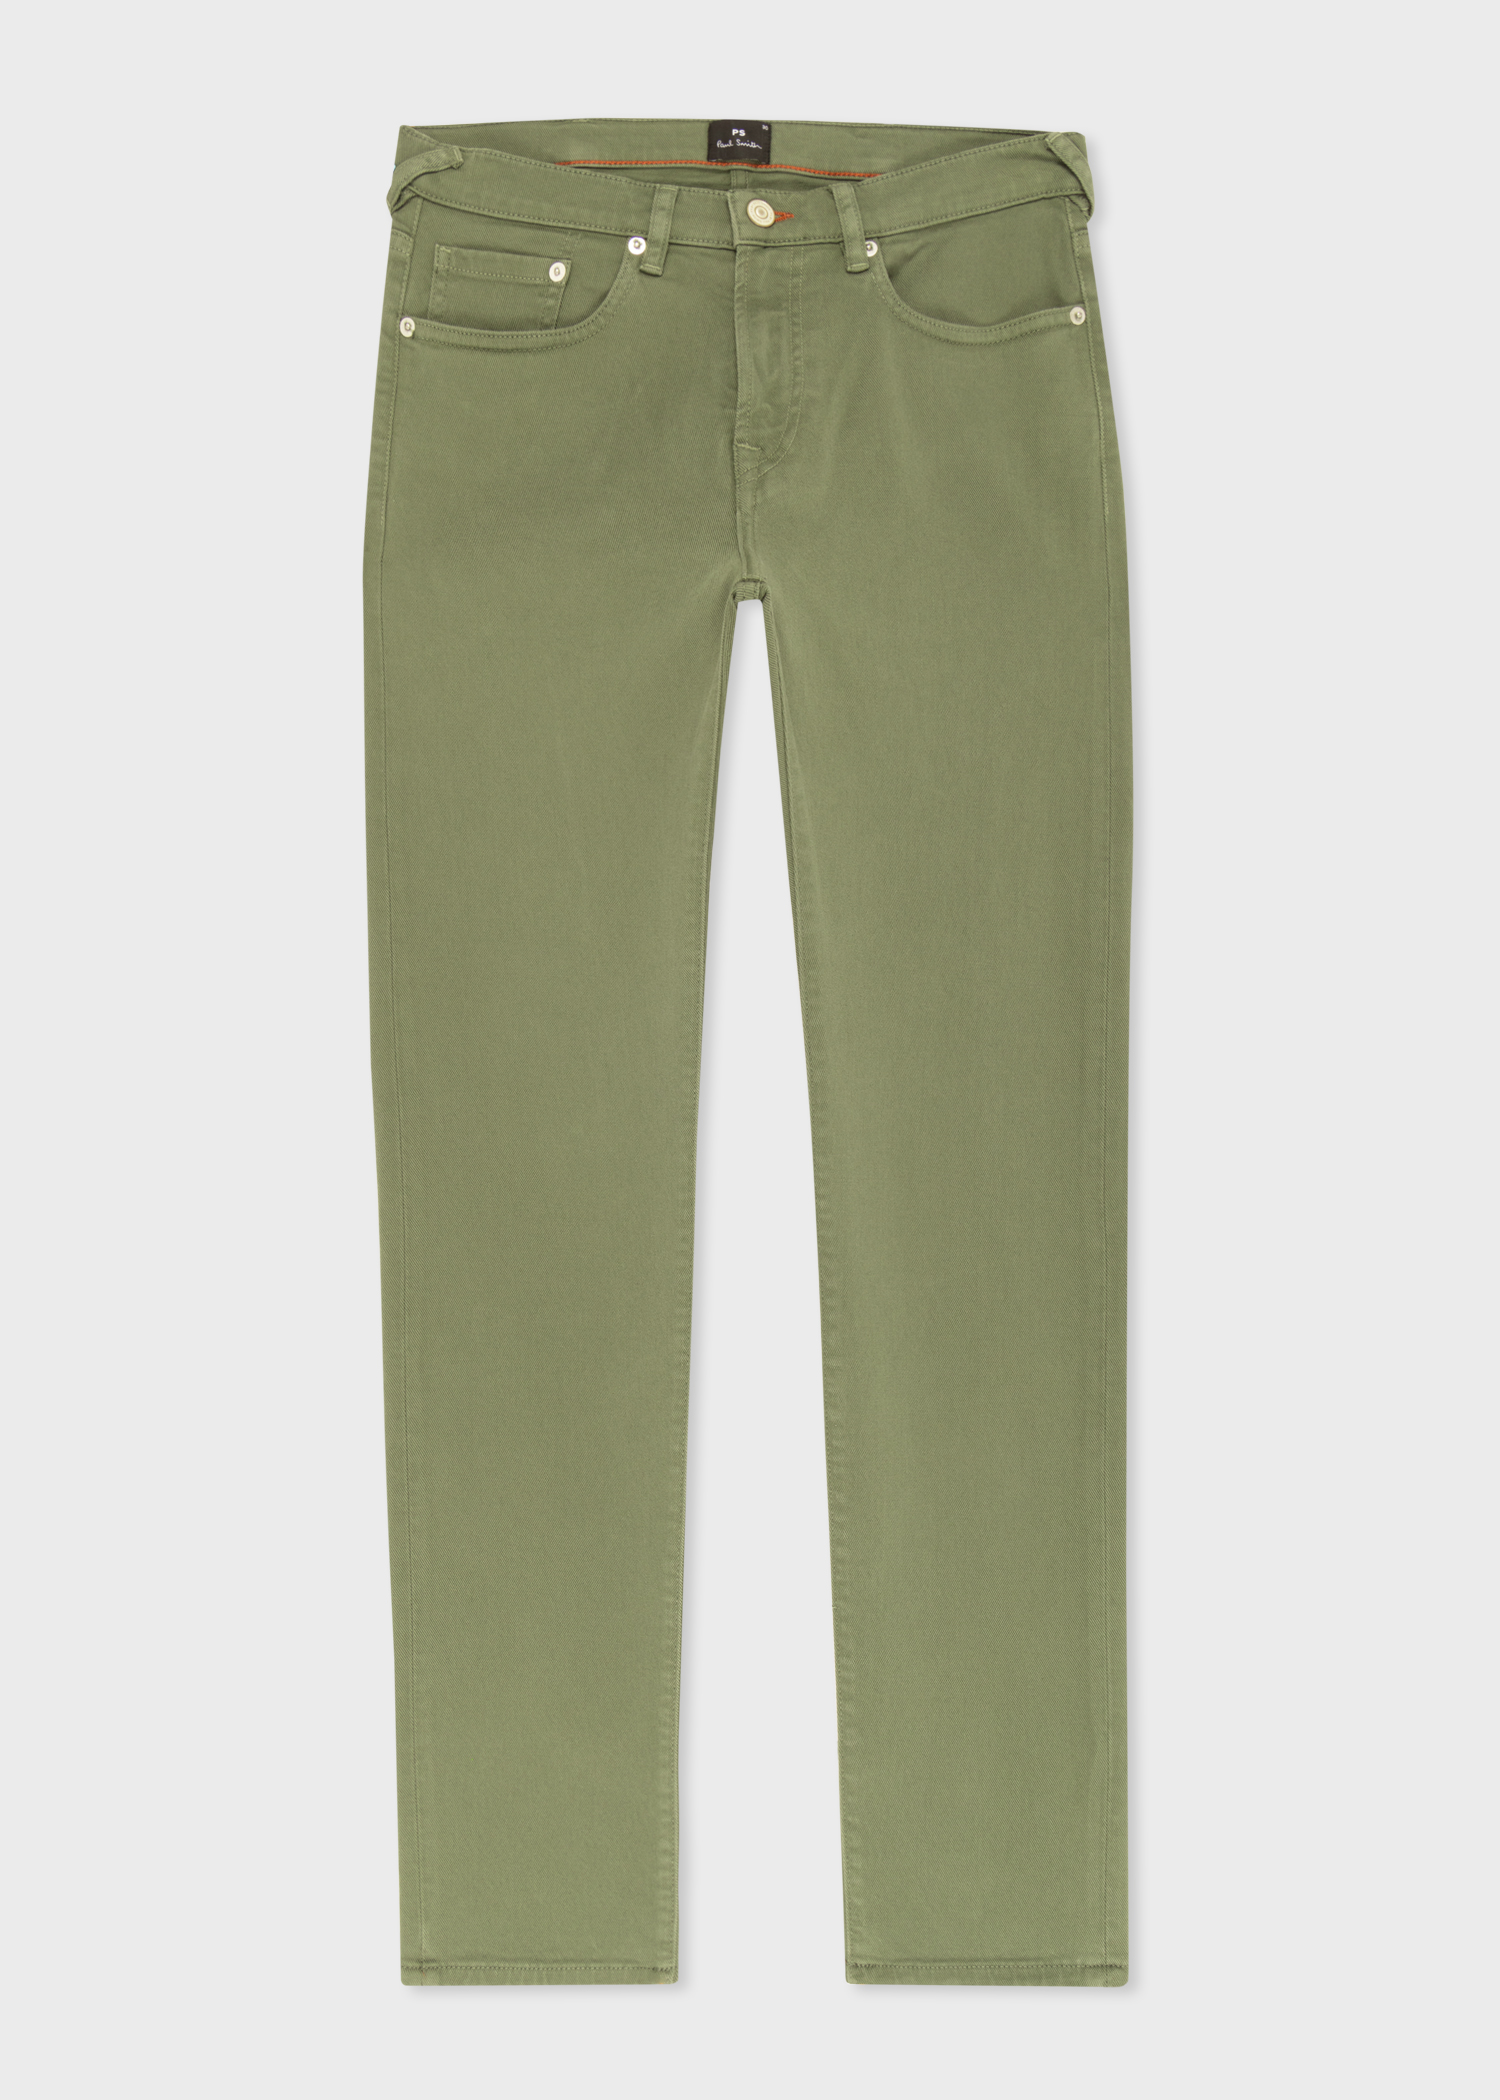 Men's Tapered-Fit Khaki Green Garment-Dyed Jeans